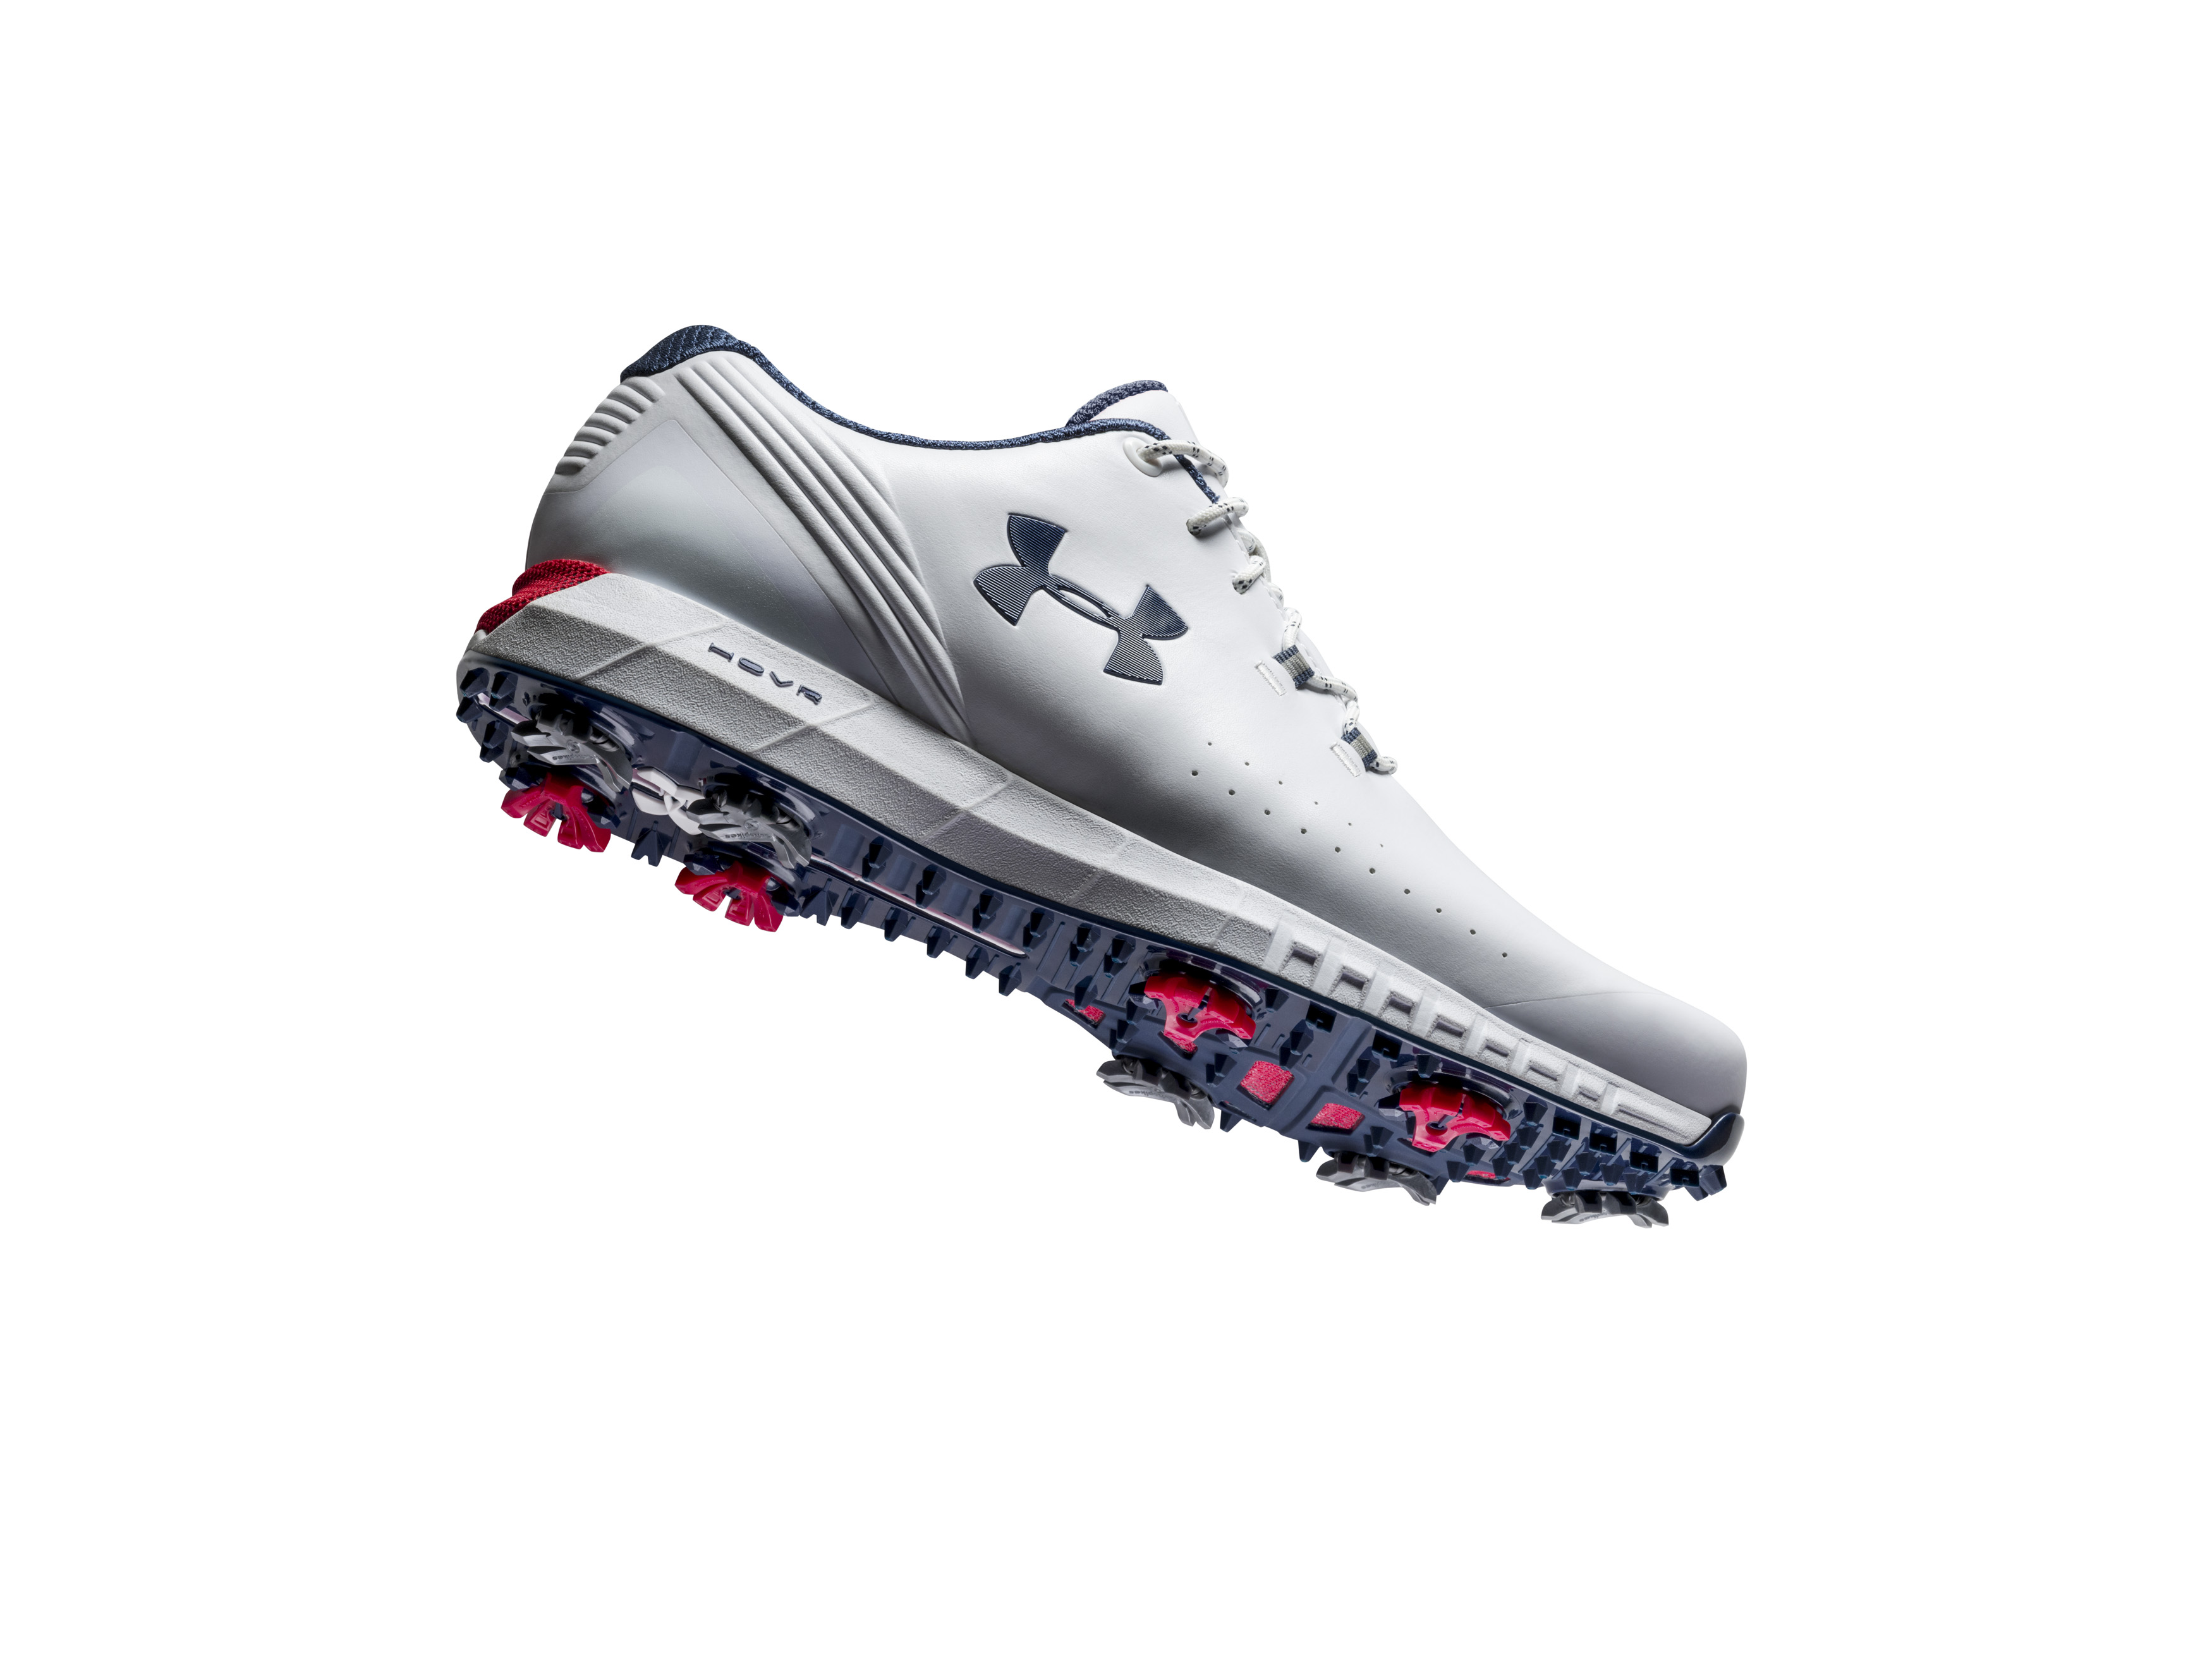 Under Armour's HOVR Drive golf shoe is about comfort | Golf Equipment: Clubs, Balls, Bags | Golf